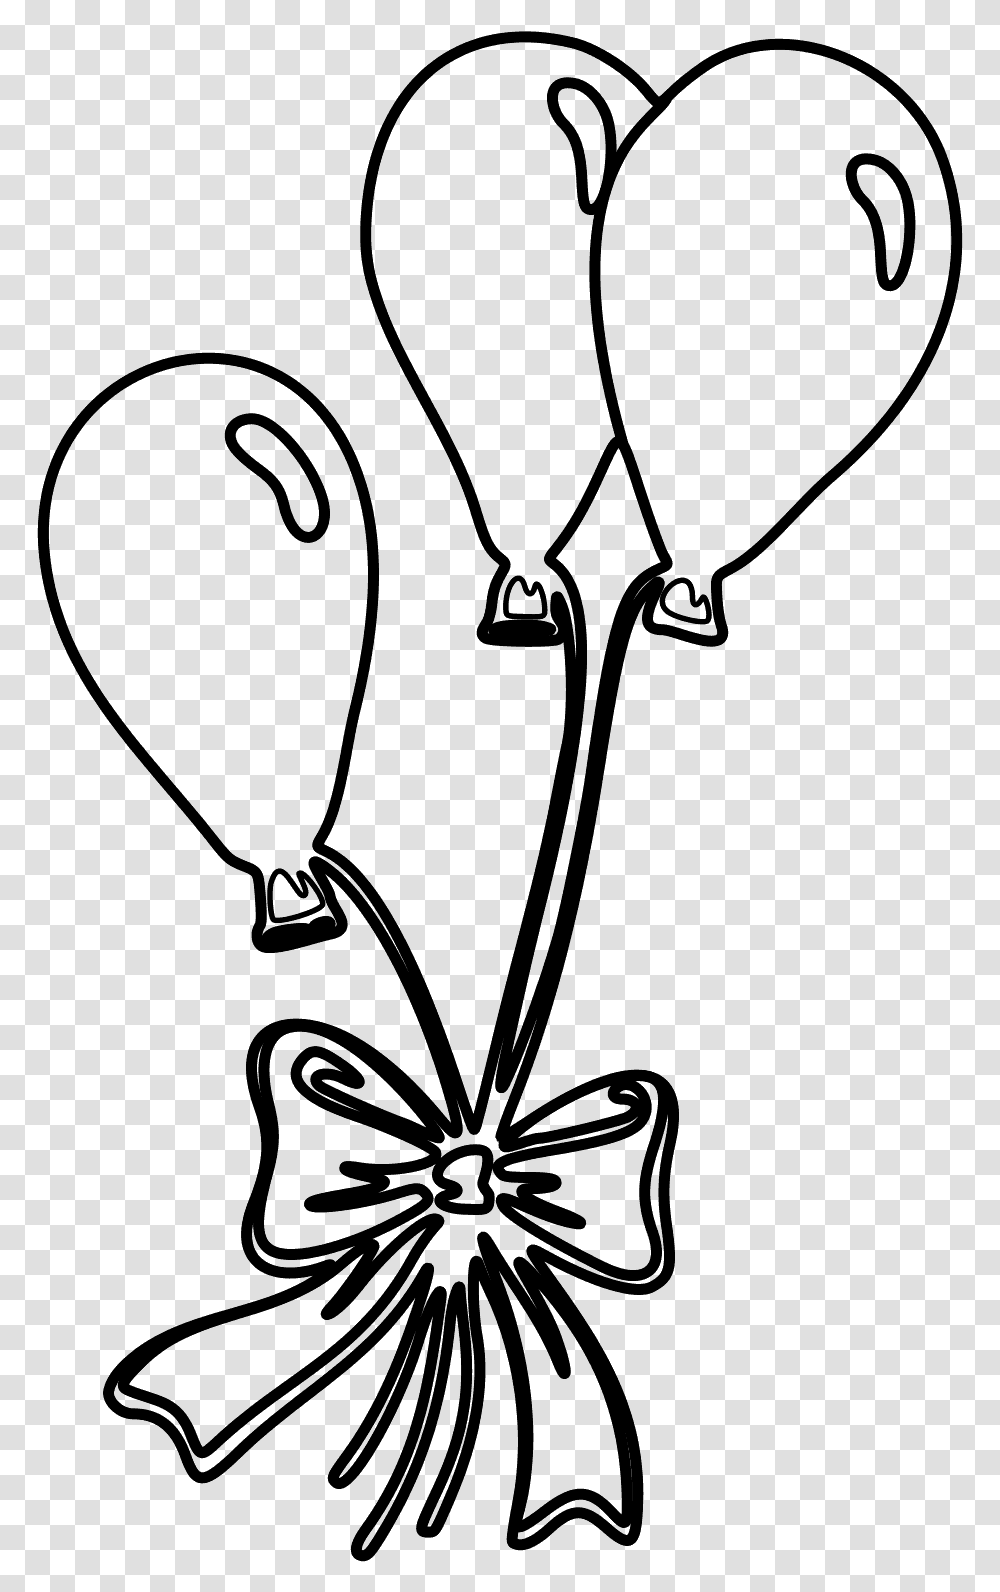 Line Drawing Of Balloons Balloon Coloring Pages, Pendant, Necklace ...